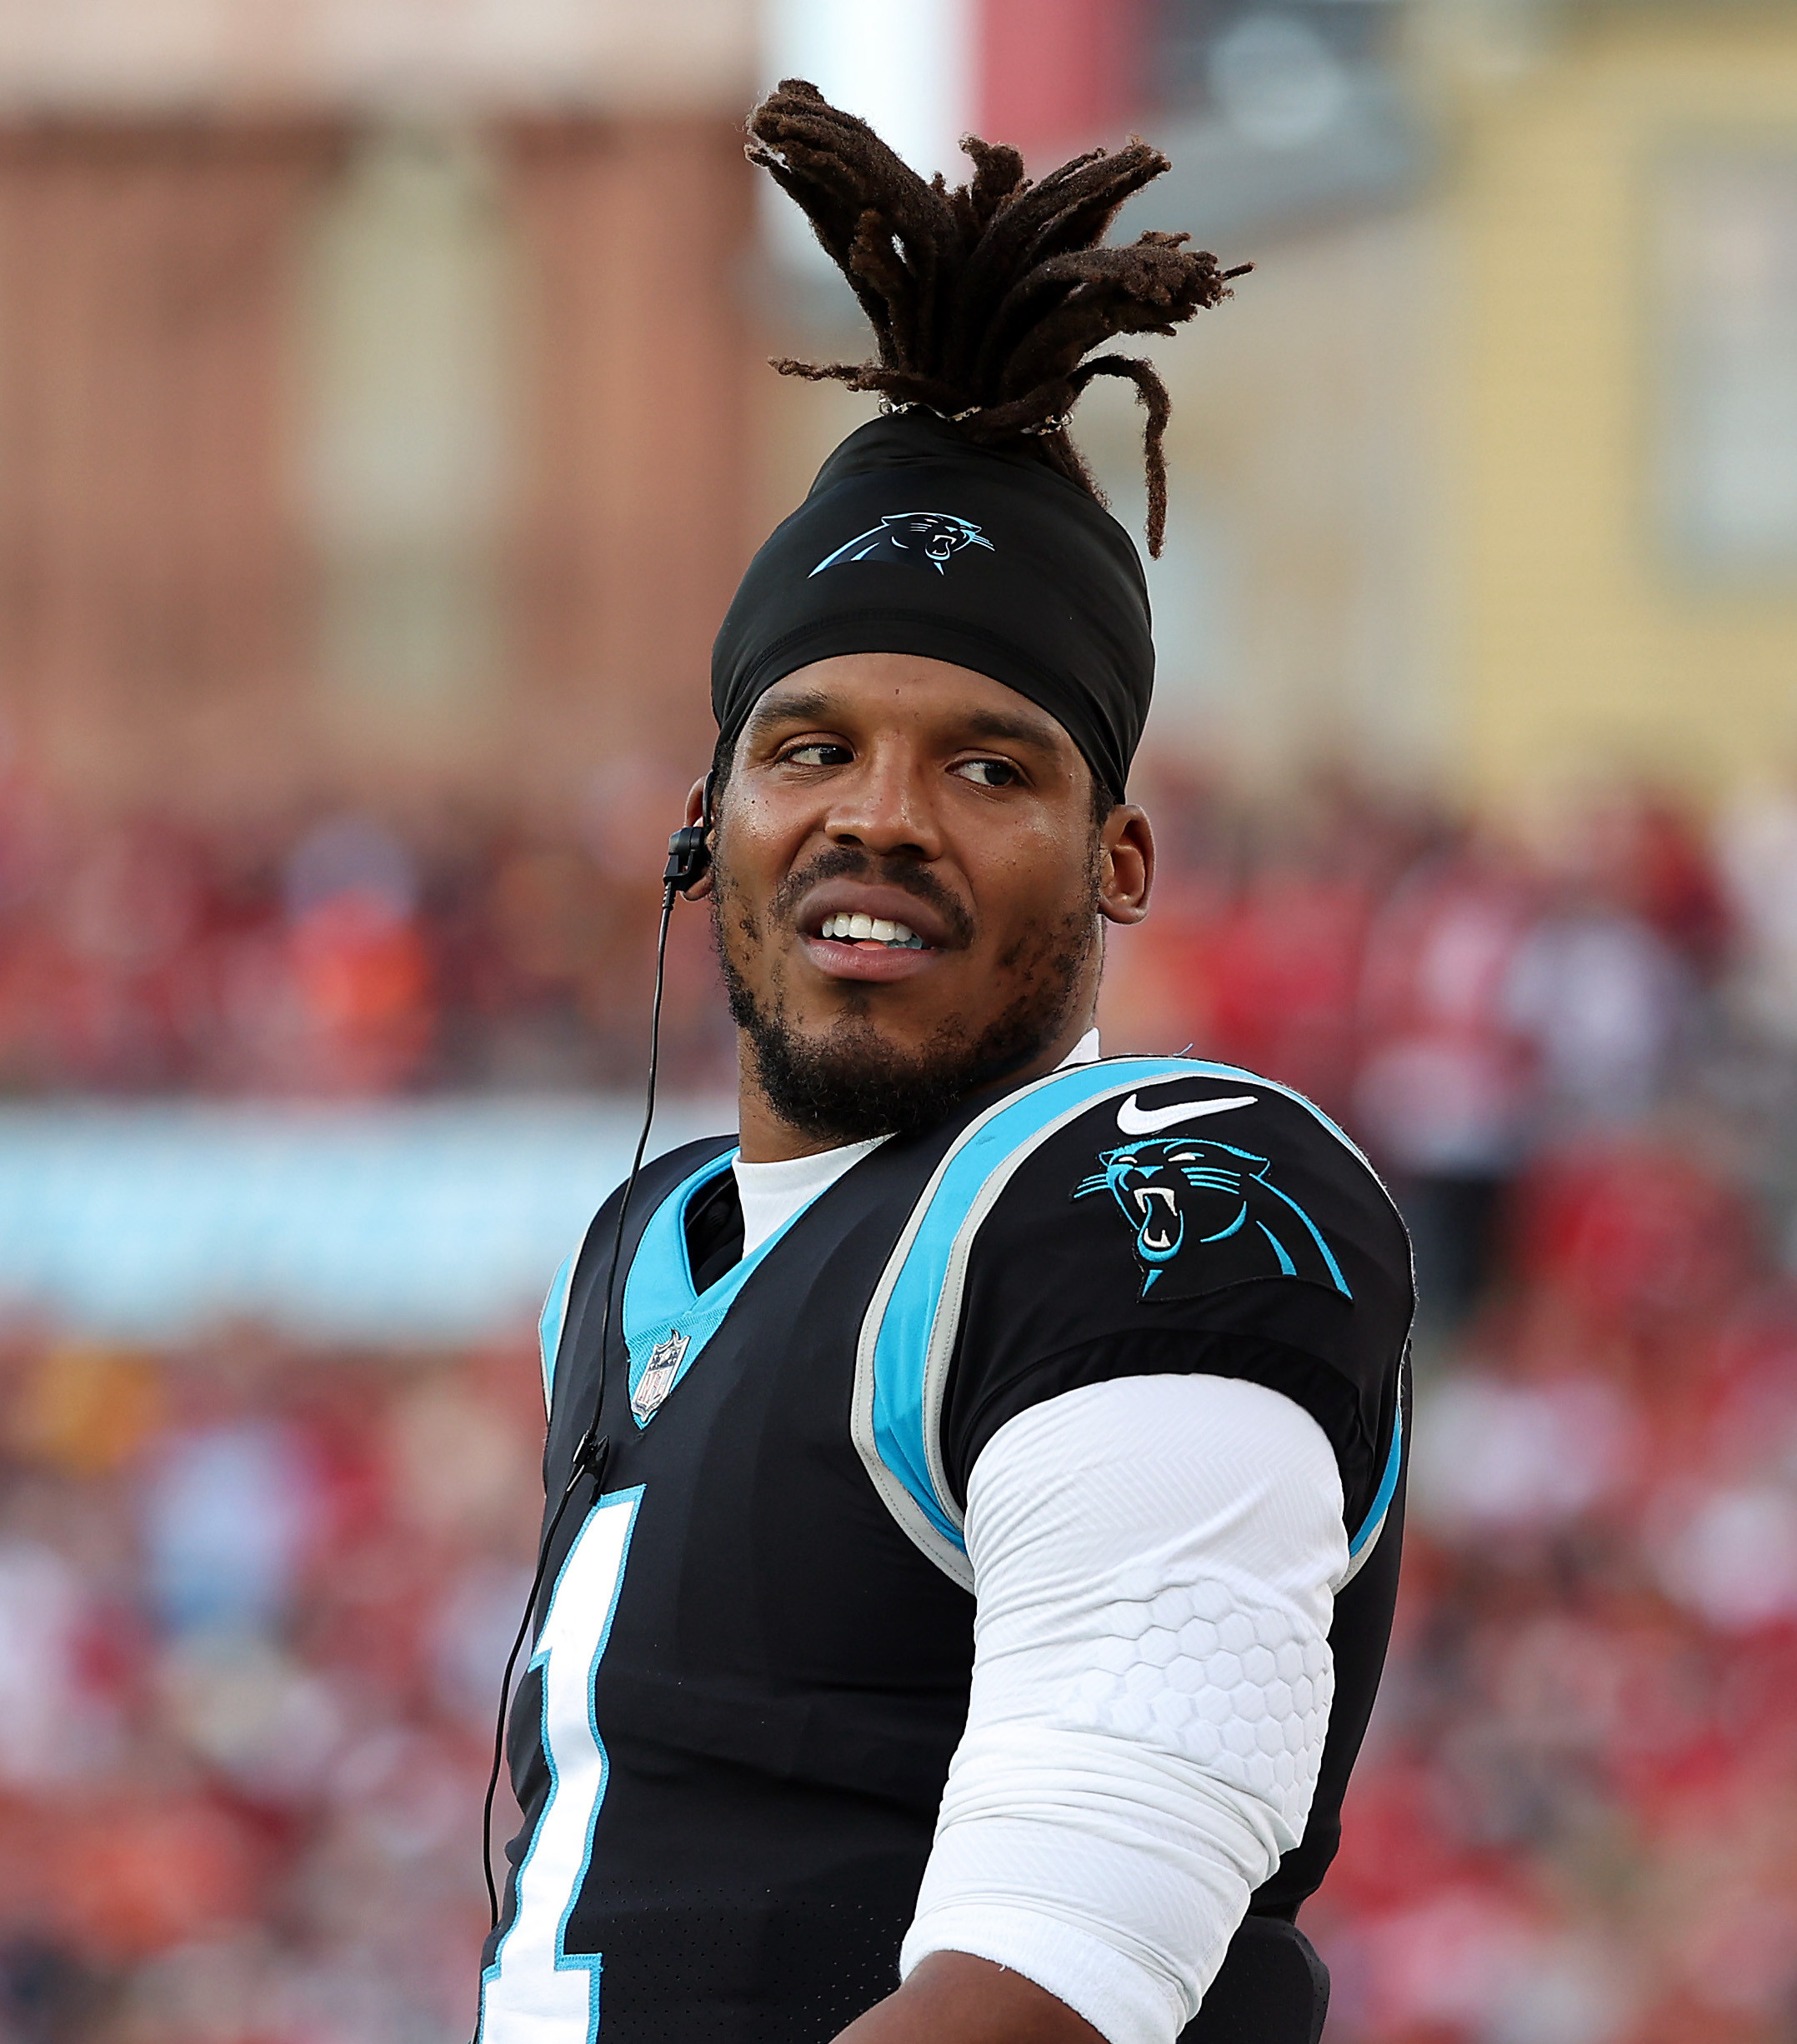 Cam-Newton-Says-Women-Should-Be-Quiet-and-Stay-in-the-Kitchen